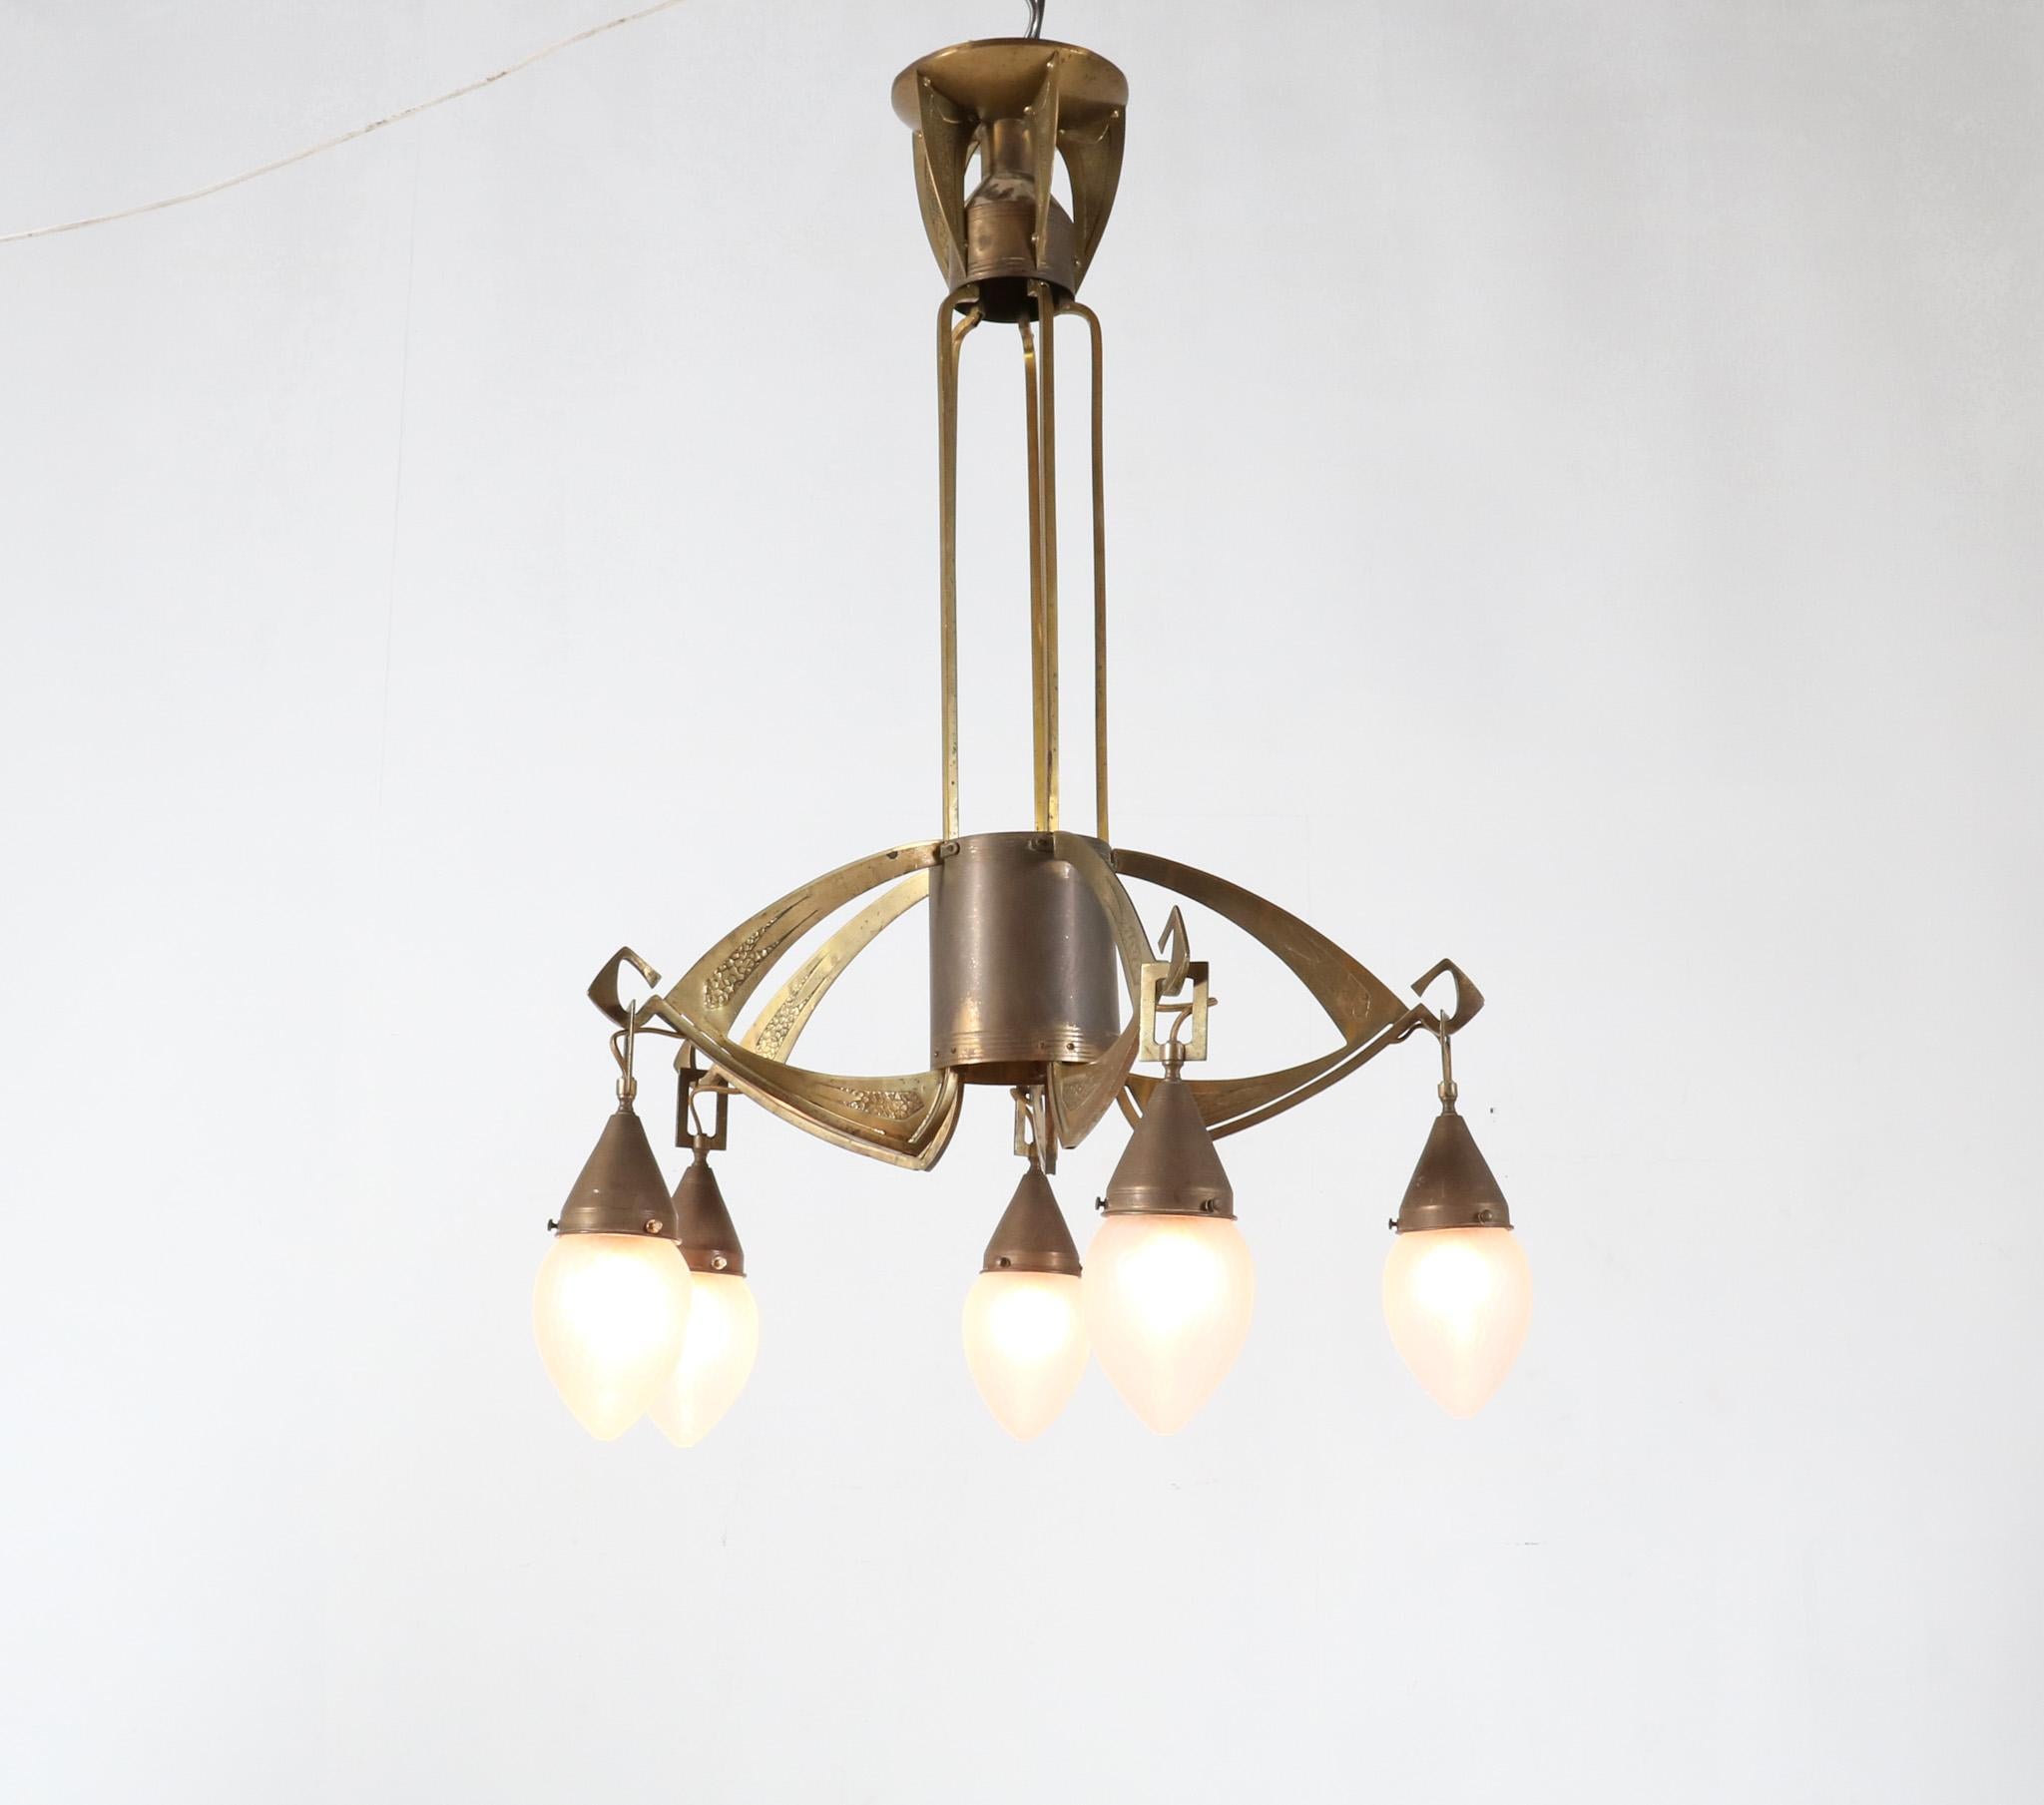 Magnificent and rare Arts & Crafts Jugendstil chandelier.
Striking Austrian or German design from the 1900s.
Original patinated brass frame with five original hand-blown glass shades.
In very good original condition with minor wear consistent